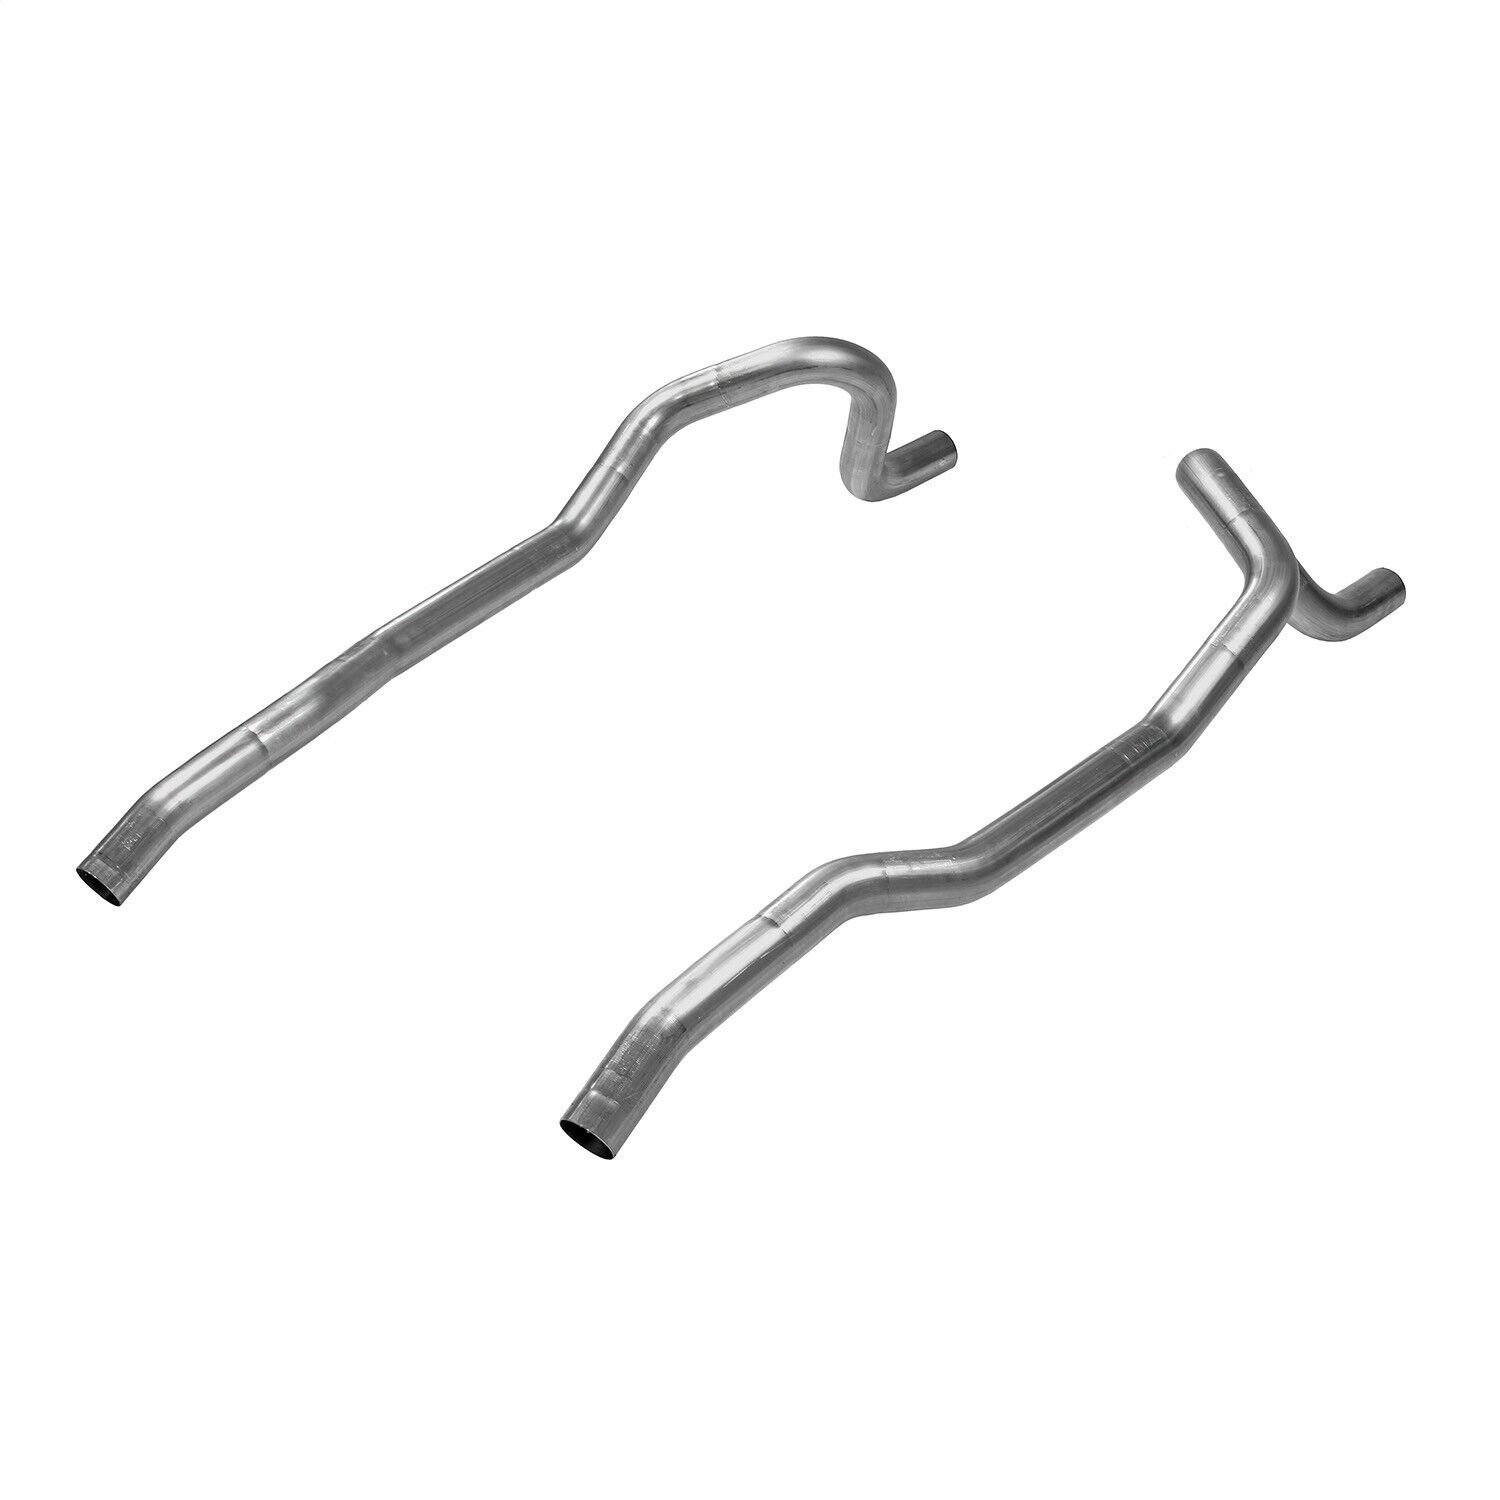 Flowmaster 15826 Tailpipe Set Fits 63-74 Barracuda Dart Duster Scamp Valiant